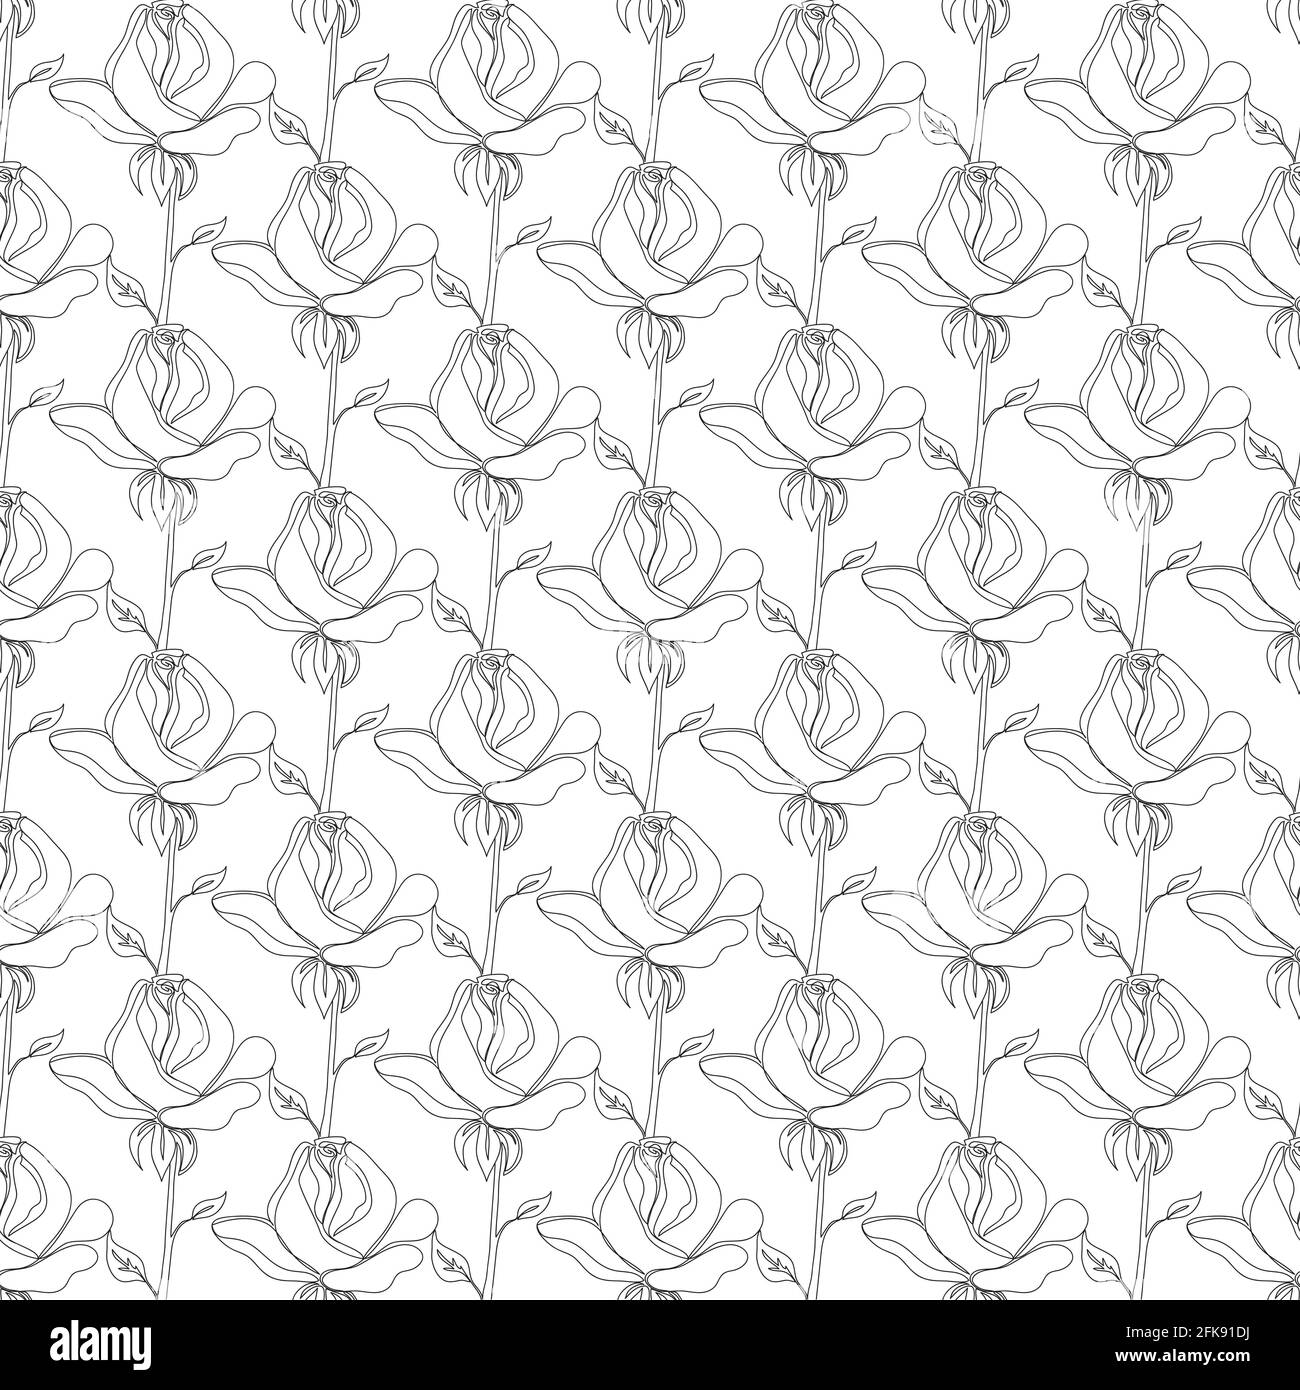 Seamless vector pattern with roses. Black and white floral background with sketch of roses. Stock Vector